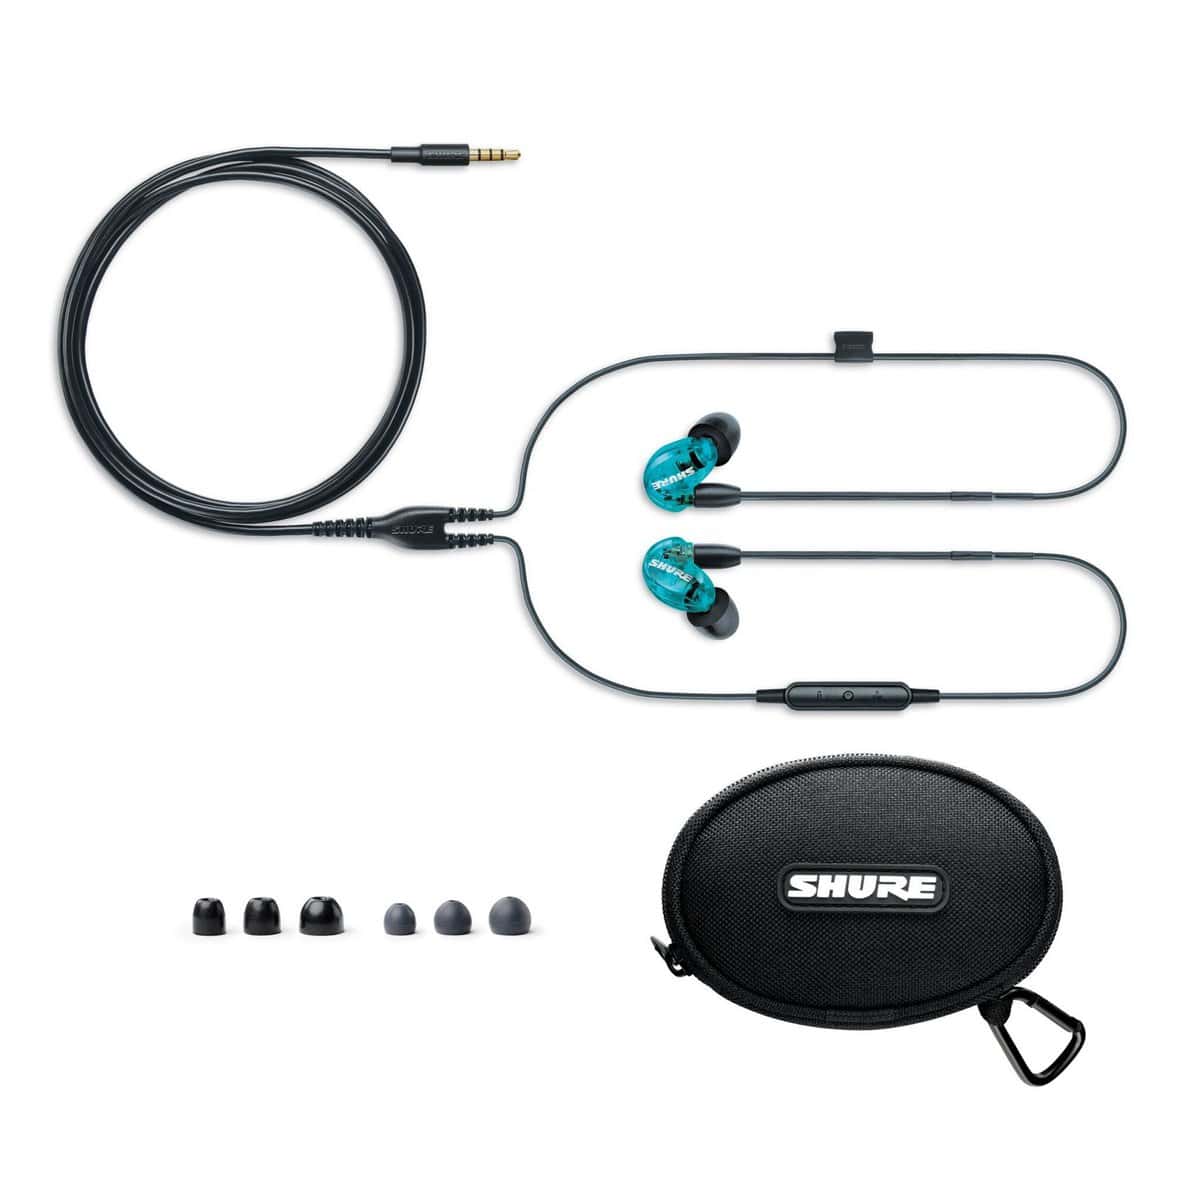 Shure SE215 Special Edition Sound Isolating Earphones with 3.5mm Remote and Mic Cable - Blue | Zoso Music Sdn Bhd 